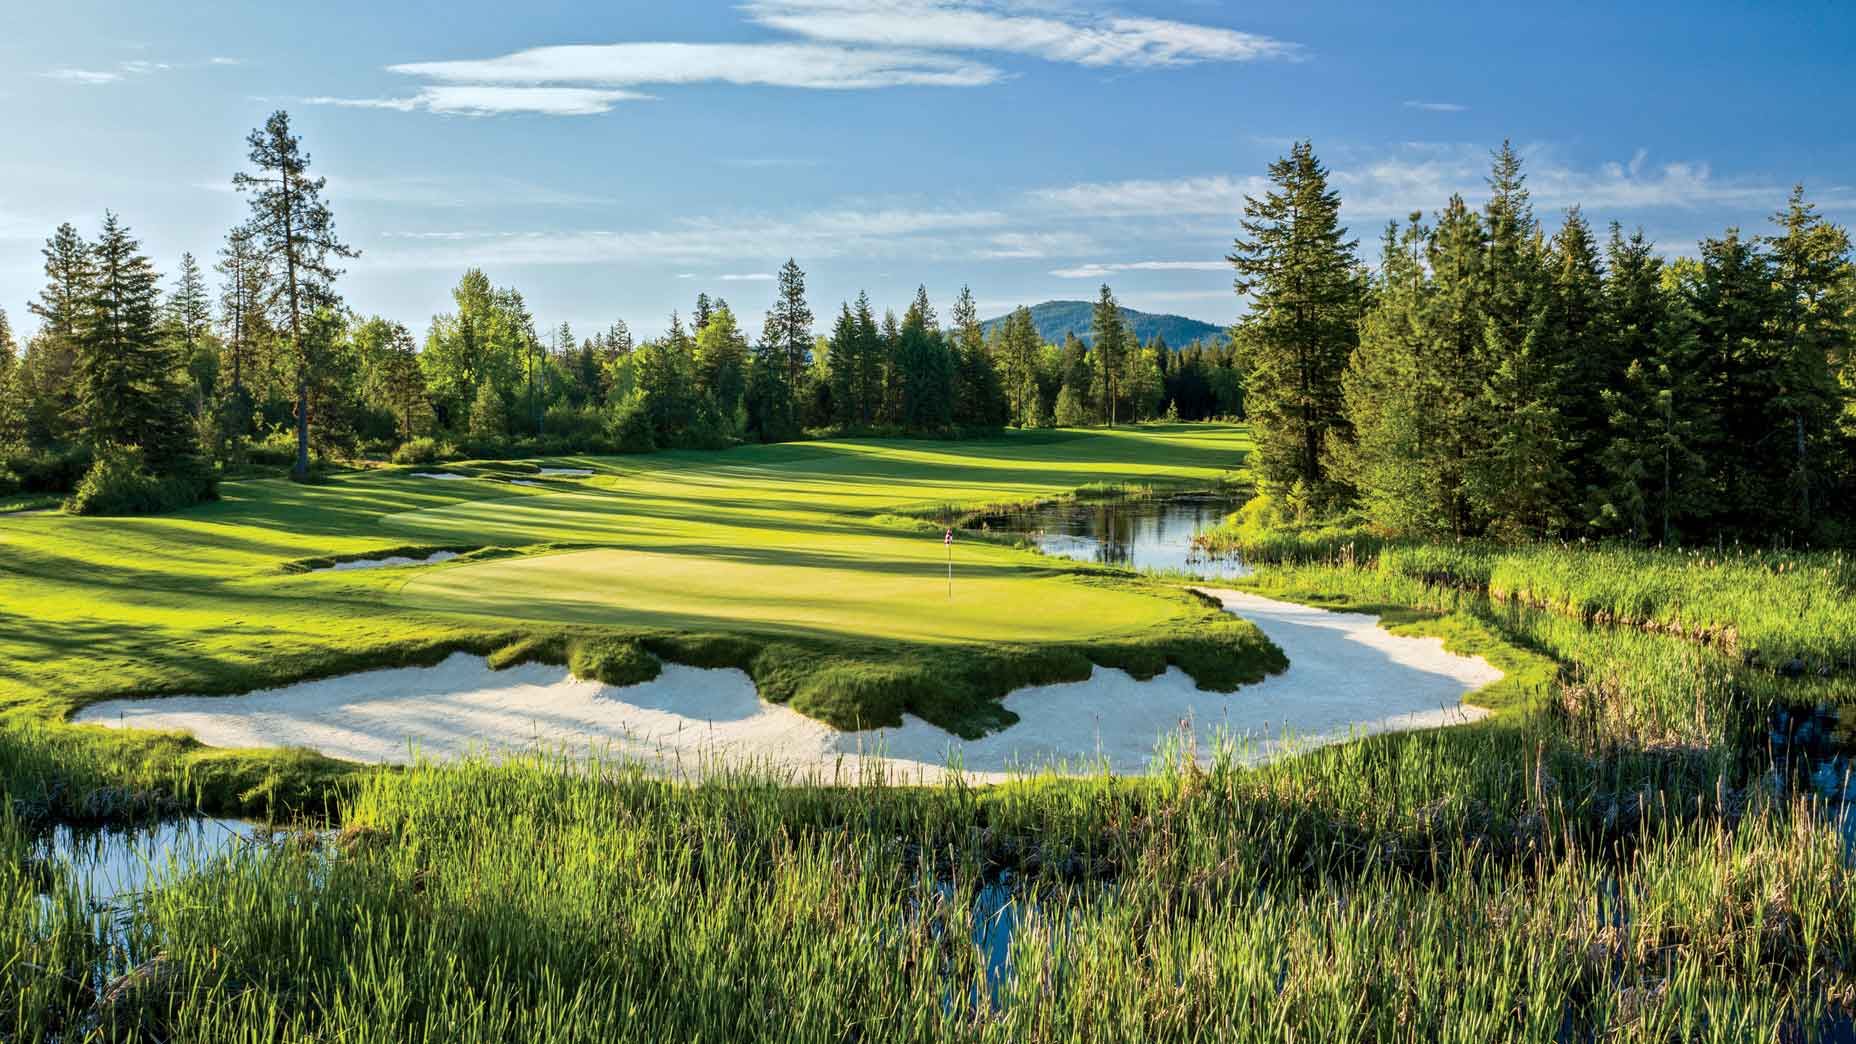 Best golf courses in Idaho, according to GOLF Magazine's raters